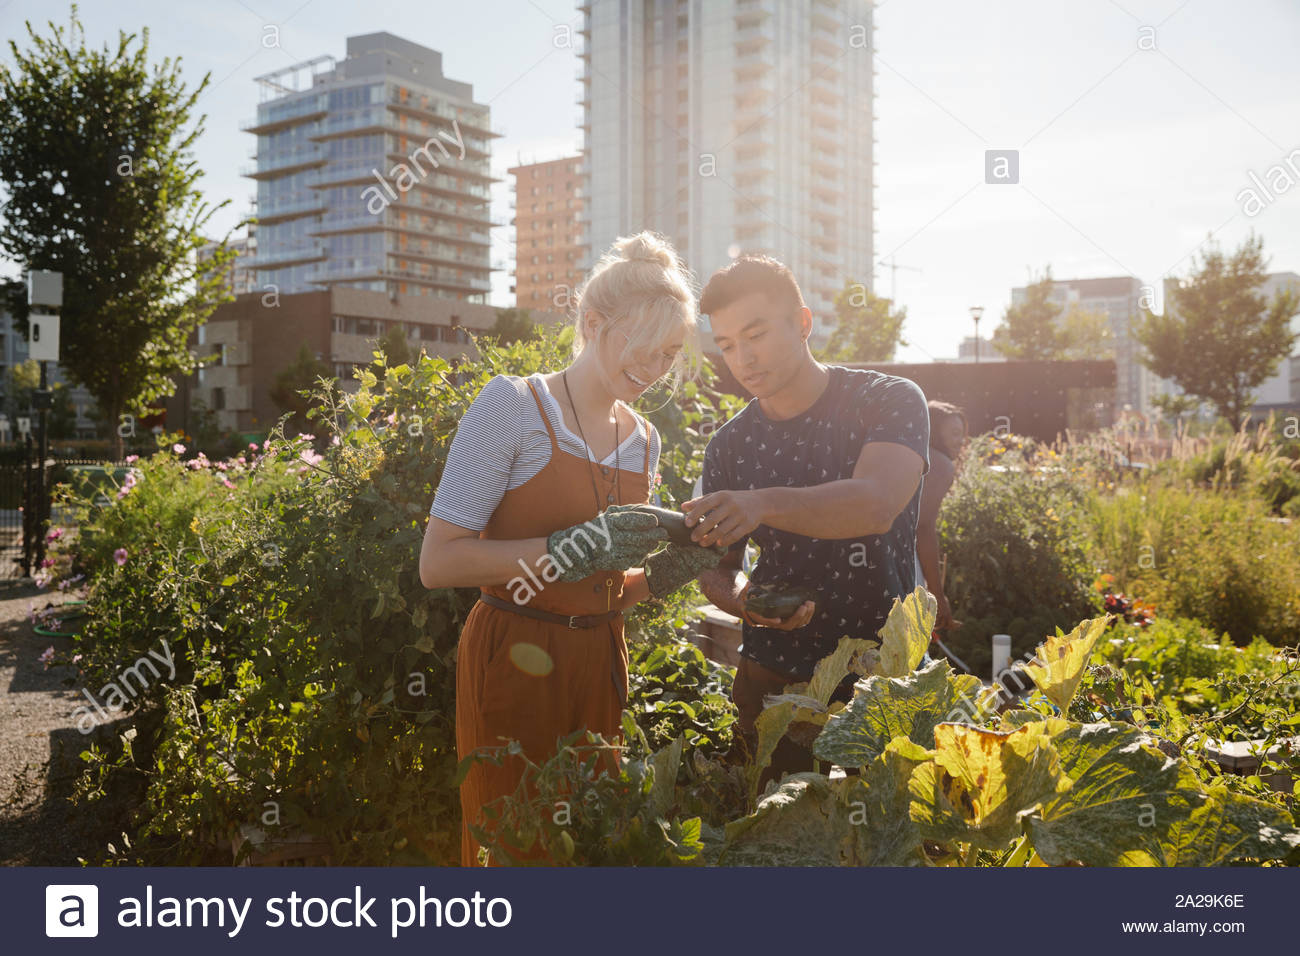 Young couple harvesting fresh vegetables in sunny, urban community garden Stock Photo